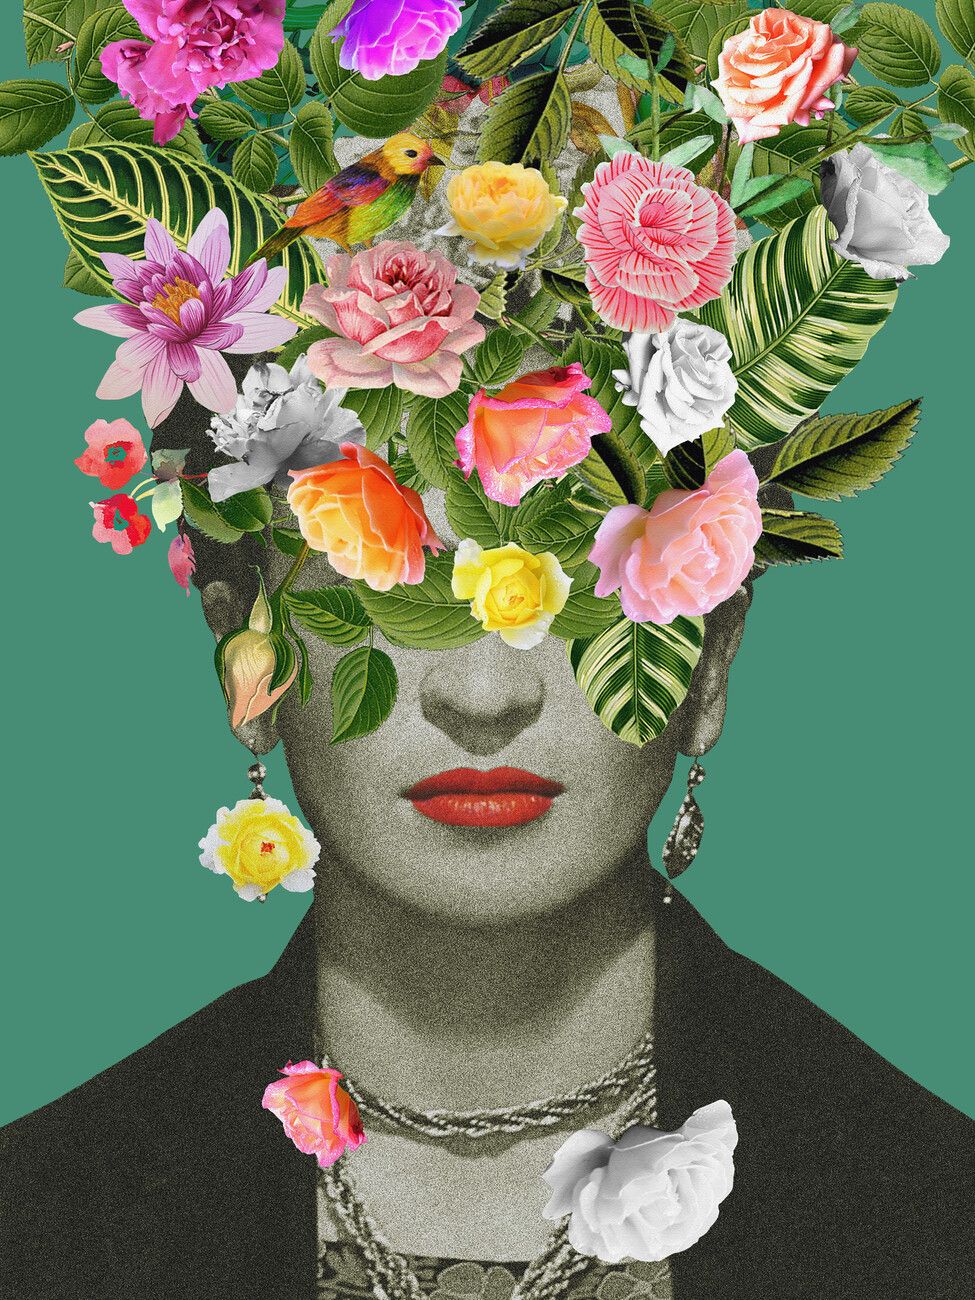 A digital collage of Frida Kahlo with flowers replacing her face. - Frida Kahlo